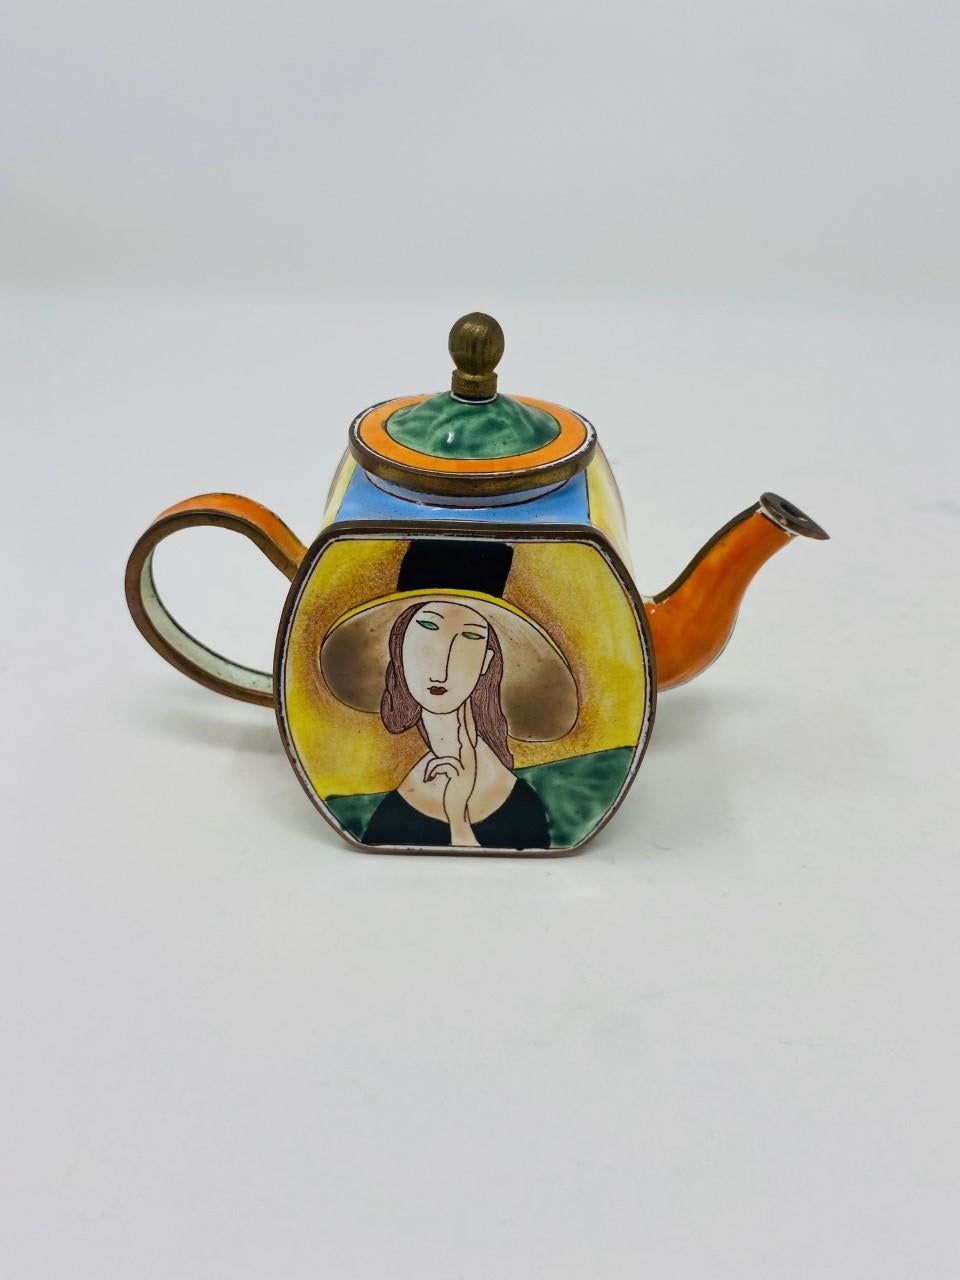 American Miniature Enameled Tea Pot Hand Painted Modigliani Lady with Hat by Kelvin Chen